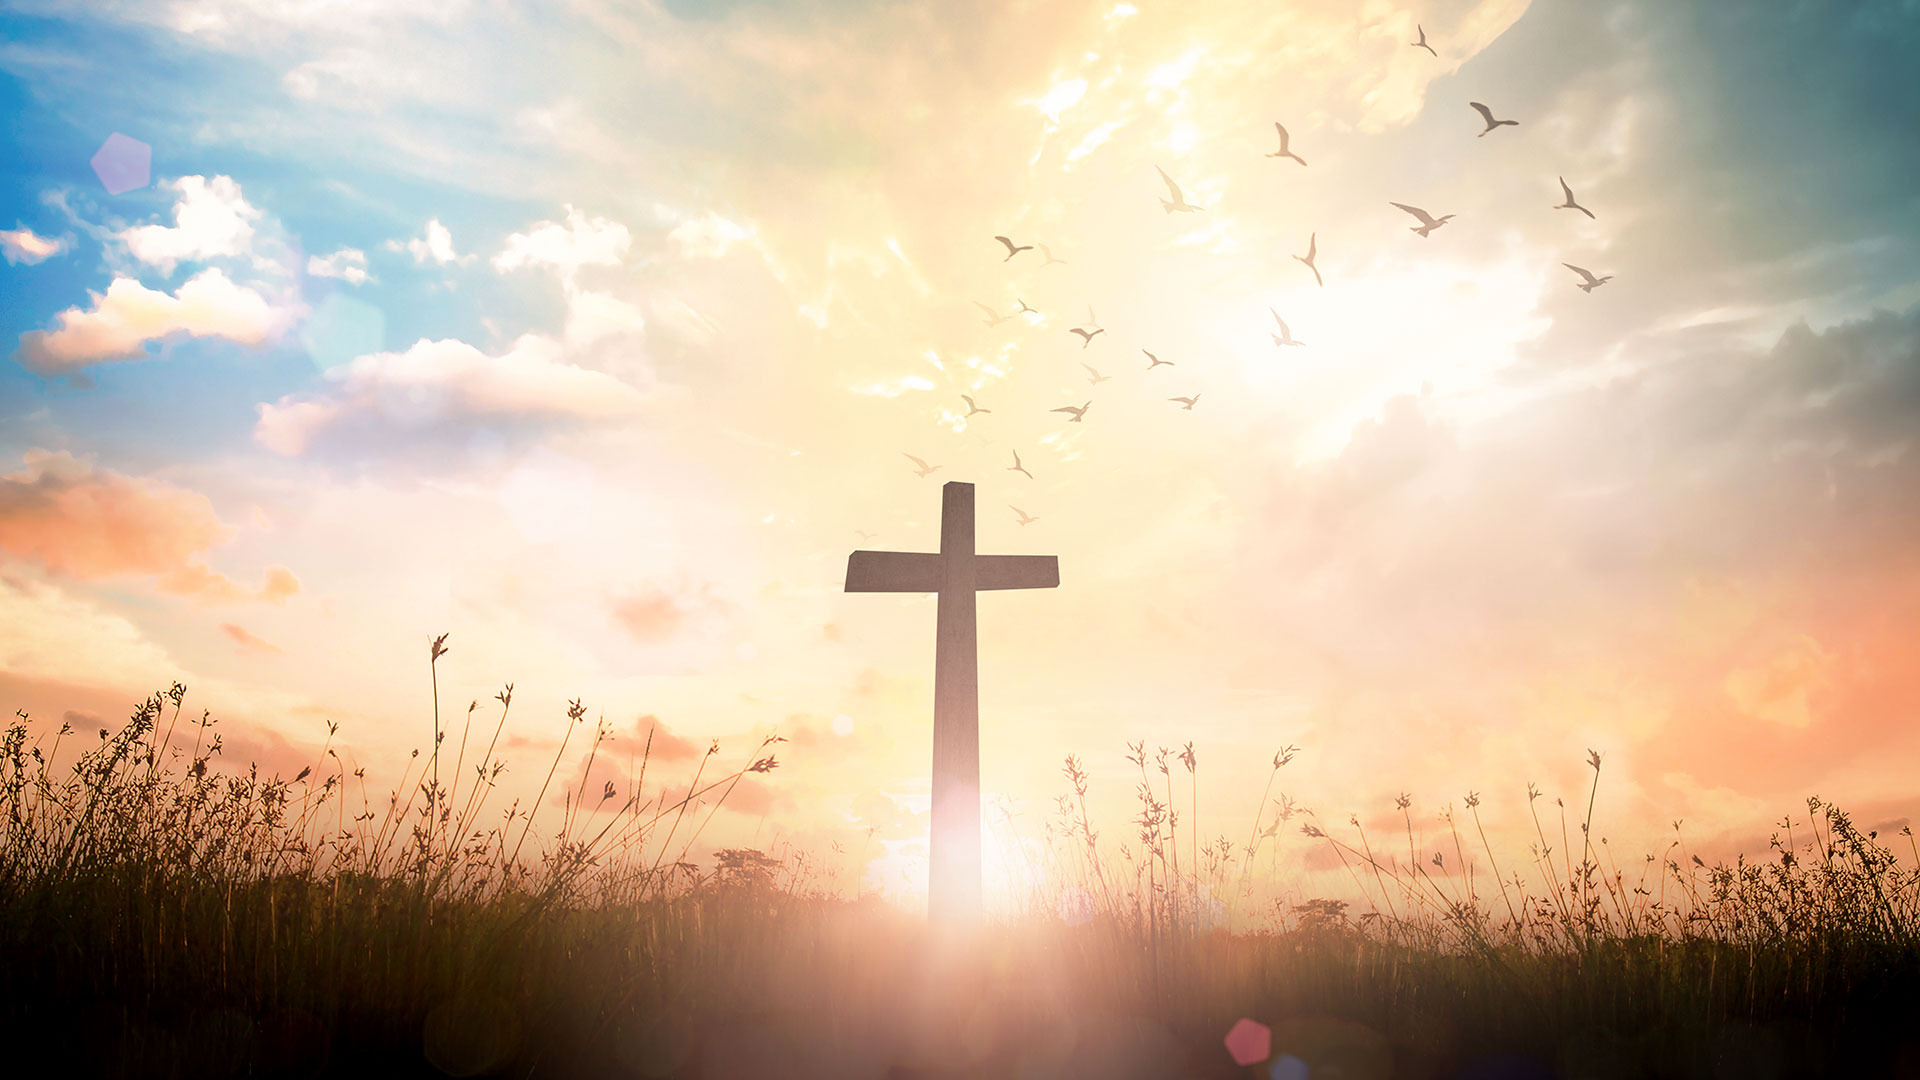 Why Is Friday Good? Helping Kids Understand Good Friday - David Jeremiah Blog